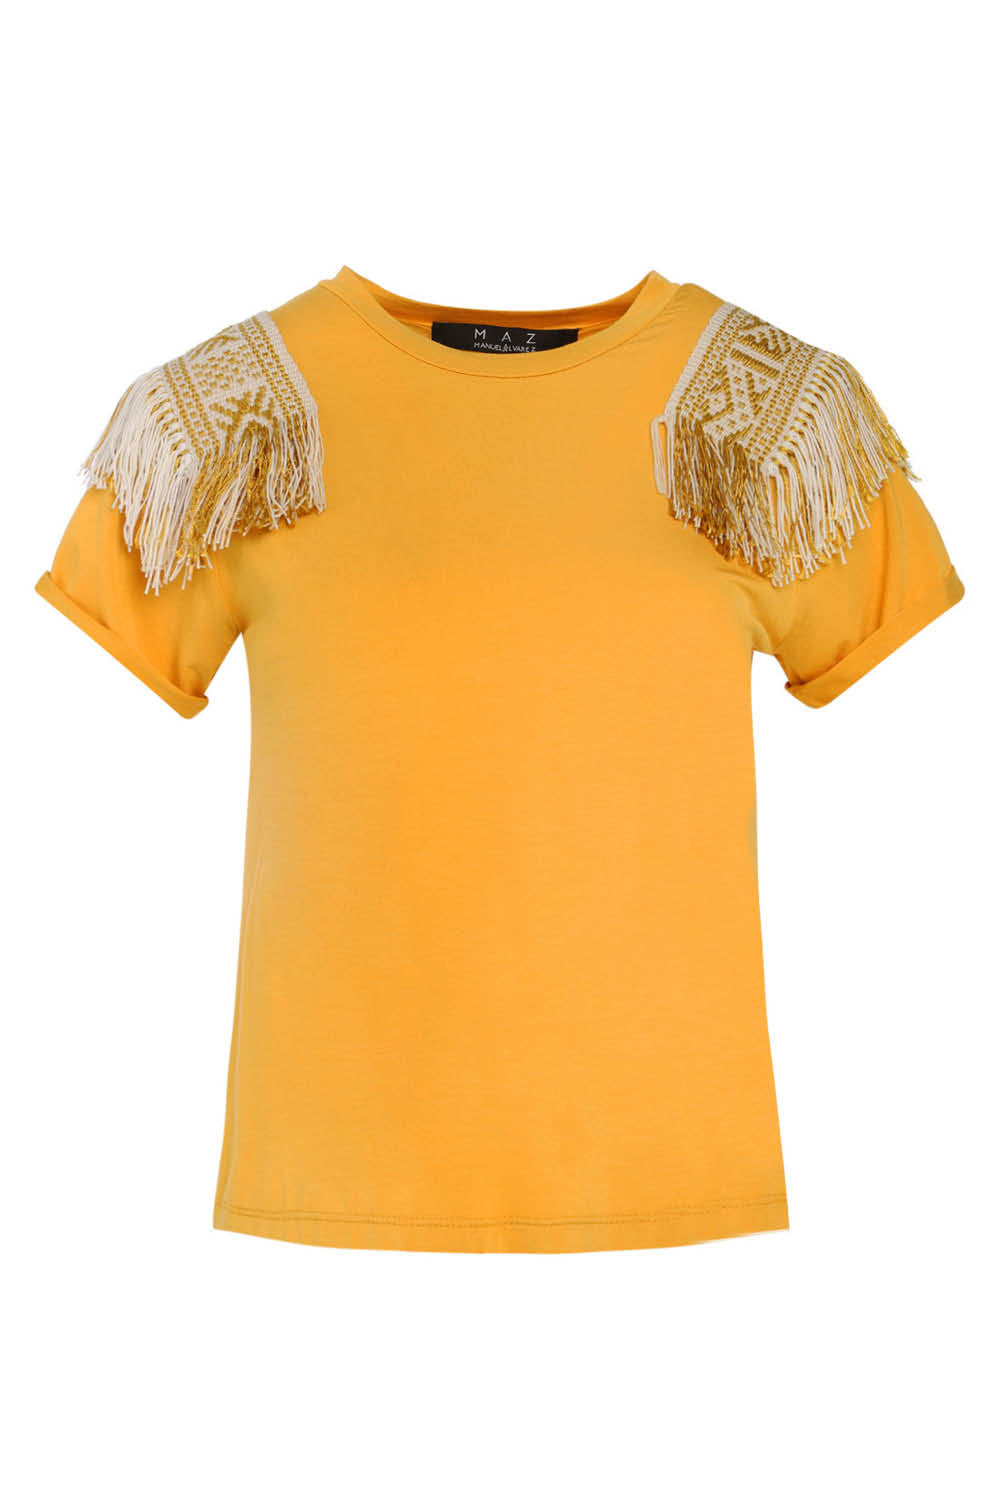 CHUMBRE FRINGES T-SHIRT IN MUSTARD / IVORY GOLD SHOULDERS